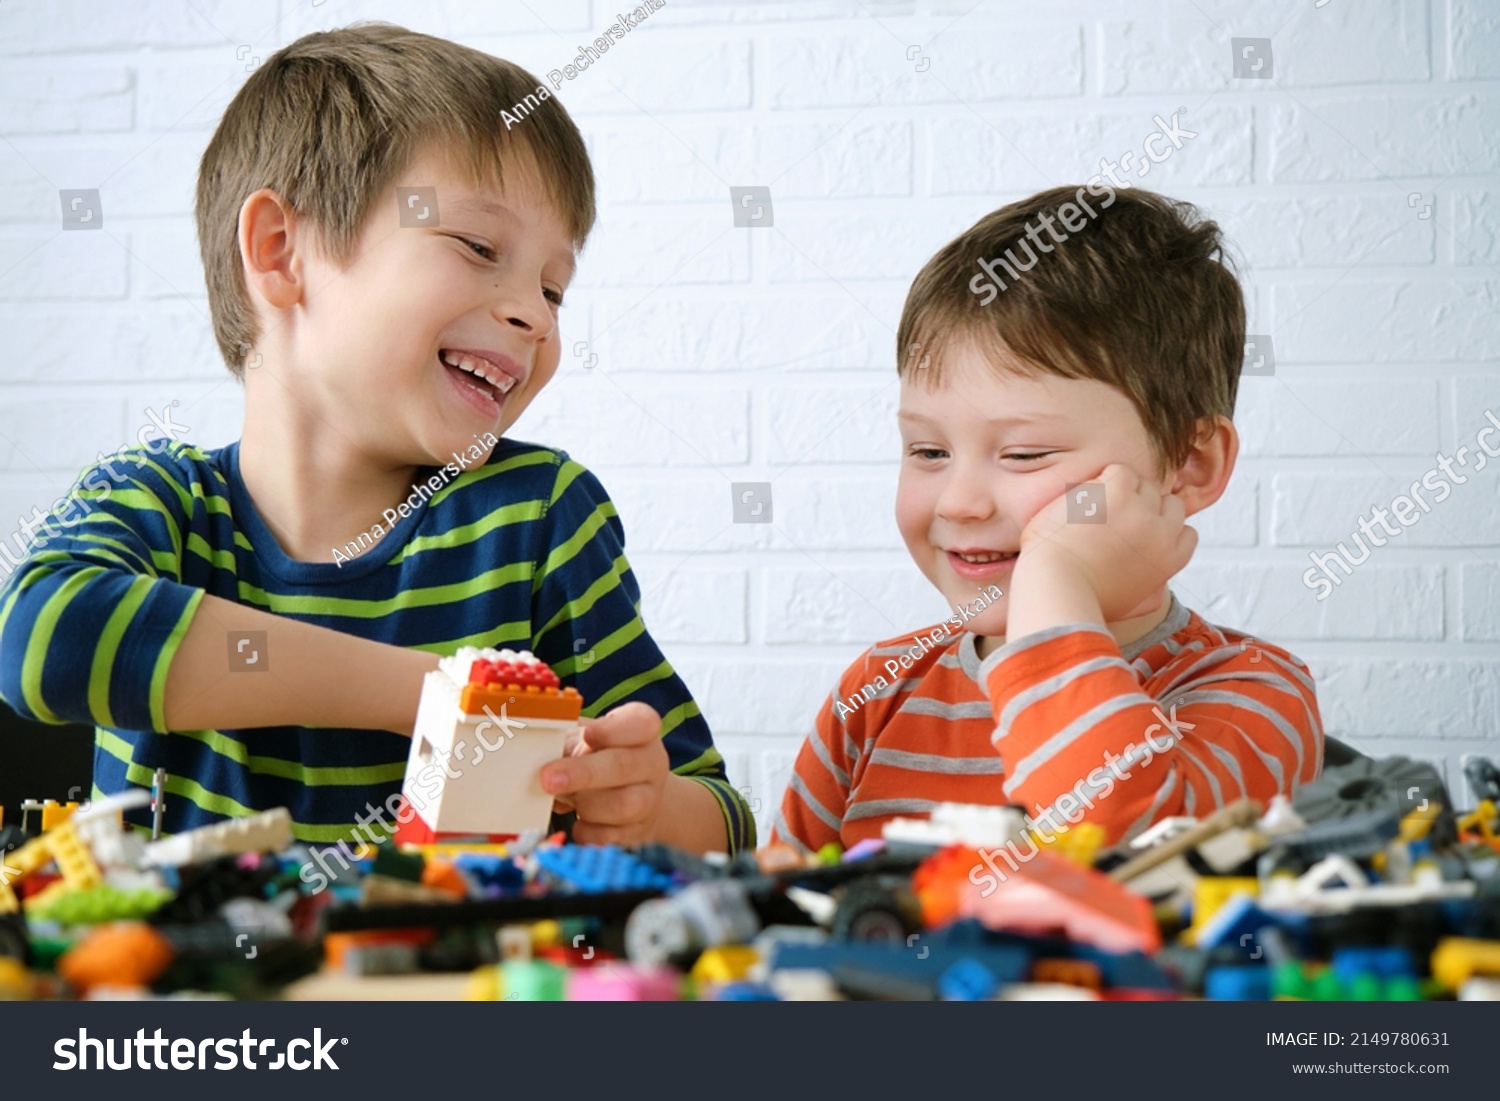 Two boys sit down at the table and assemble the designer. Children laugh, are joyful, they have fun doing things together, playing and building from details. #2149780631